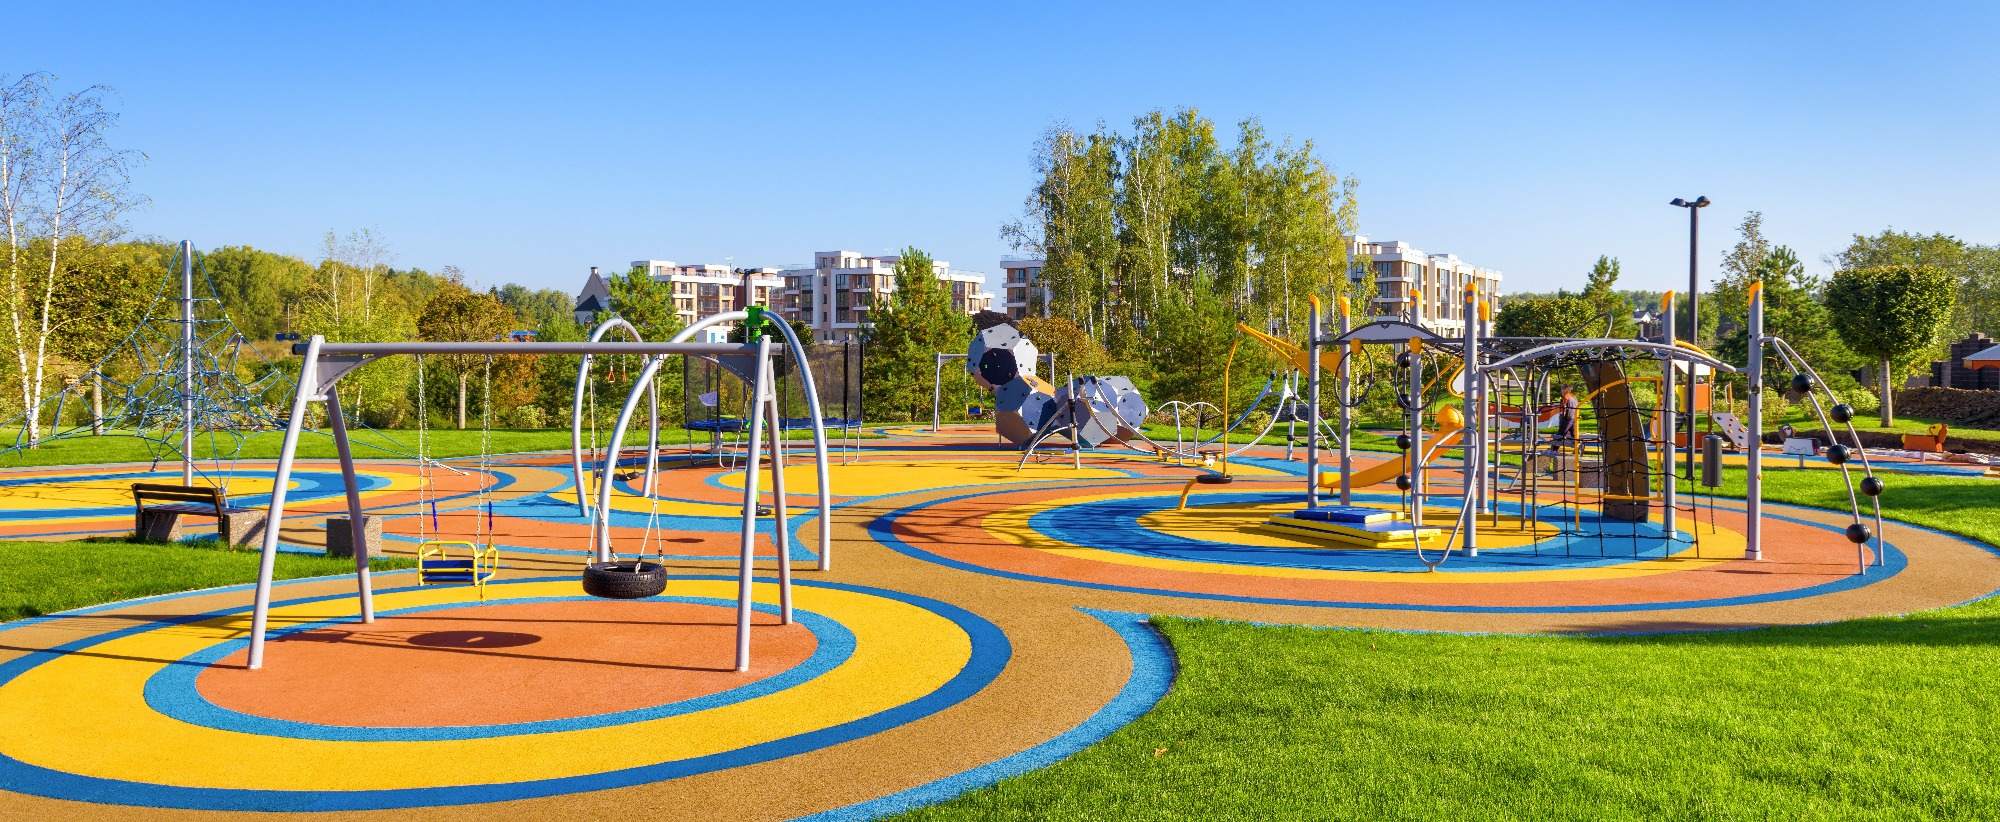 Colourful and safe children's playground